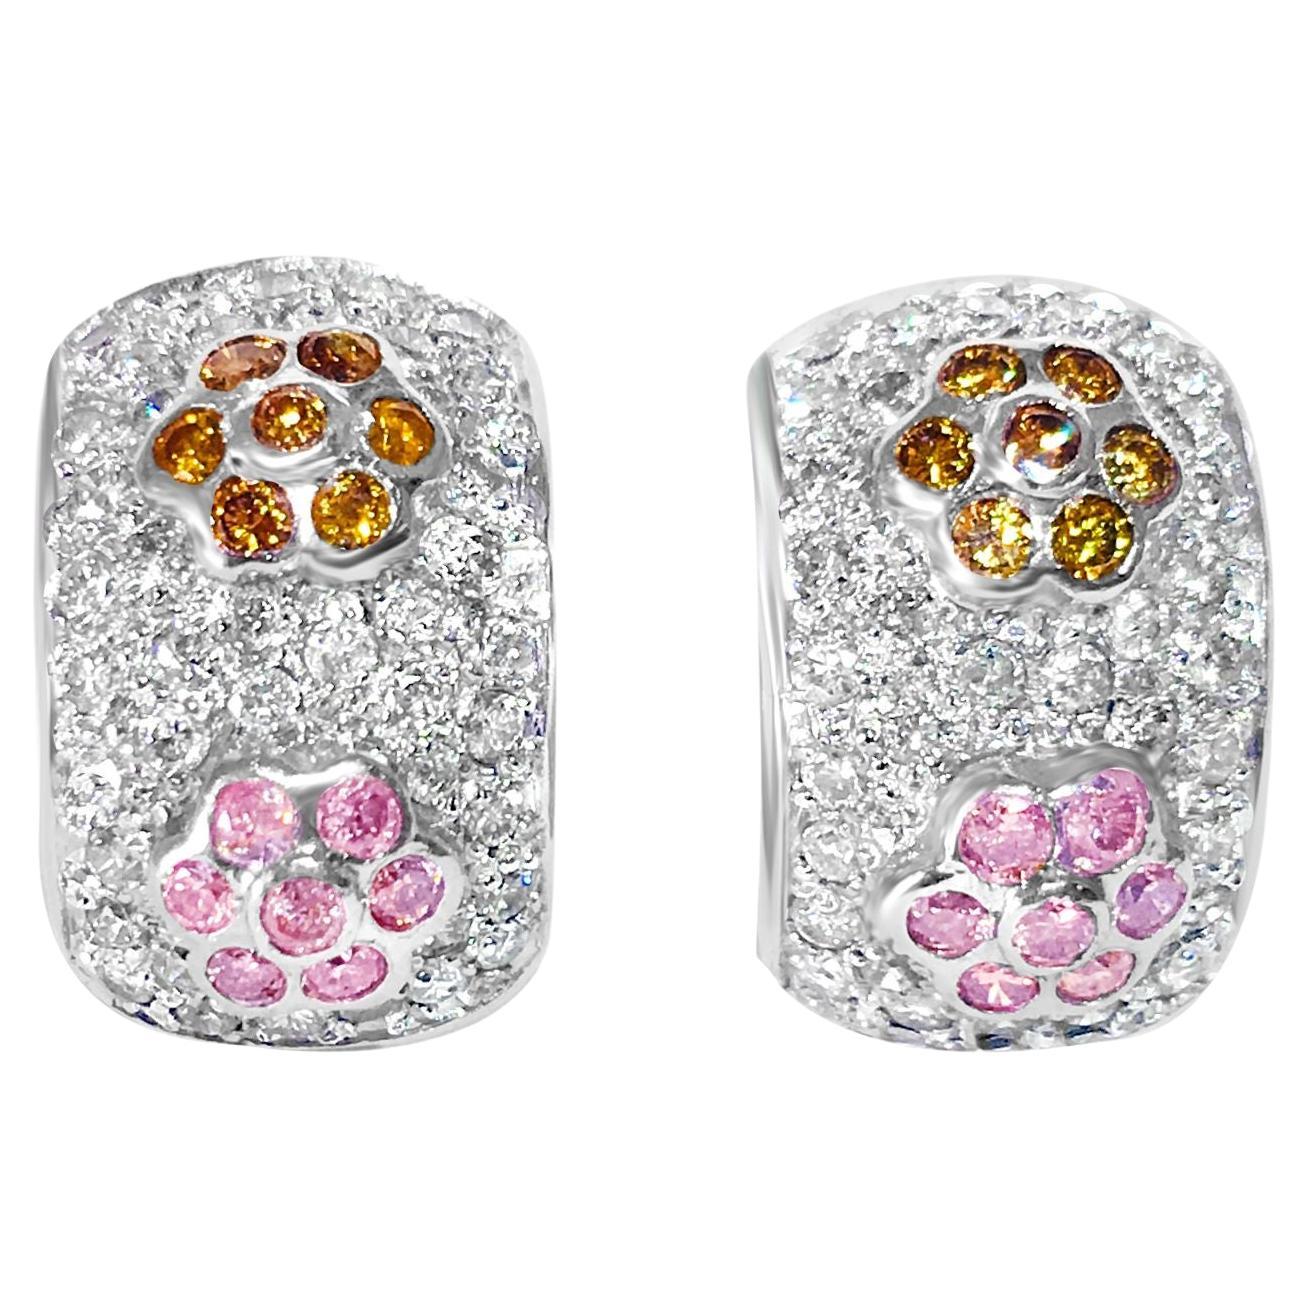 2.0 CT white, pink & yellow diamonds in 14k earrings For Sale